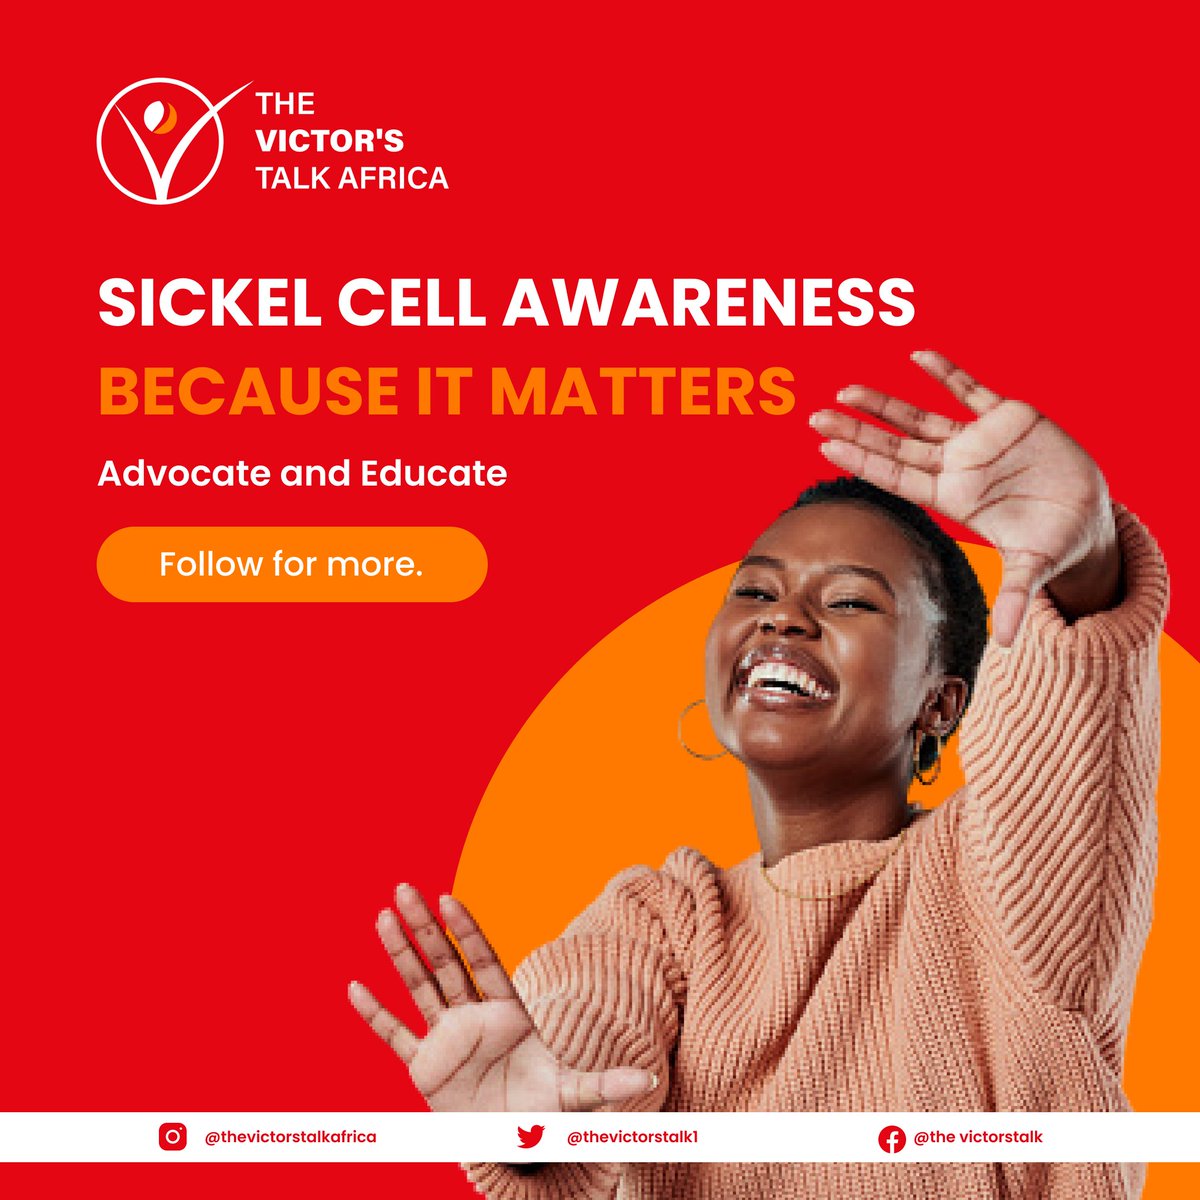 Let's get rid of the stereotype, Let's talk about sickle-cell#SickleCellAwareness#sicklecellanemia#sicklecellmatters#SickleCellDisease#SickleCellTrait#sicklecelladvocate#sicklecellawareness #sicklecelleducation#sicklecellwarrior #sicklecellawarenesseveryday  #sicklecellcommunity